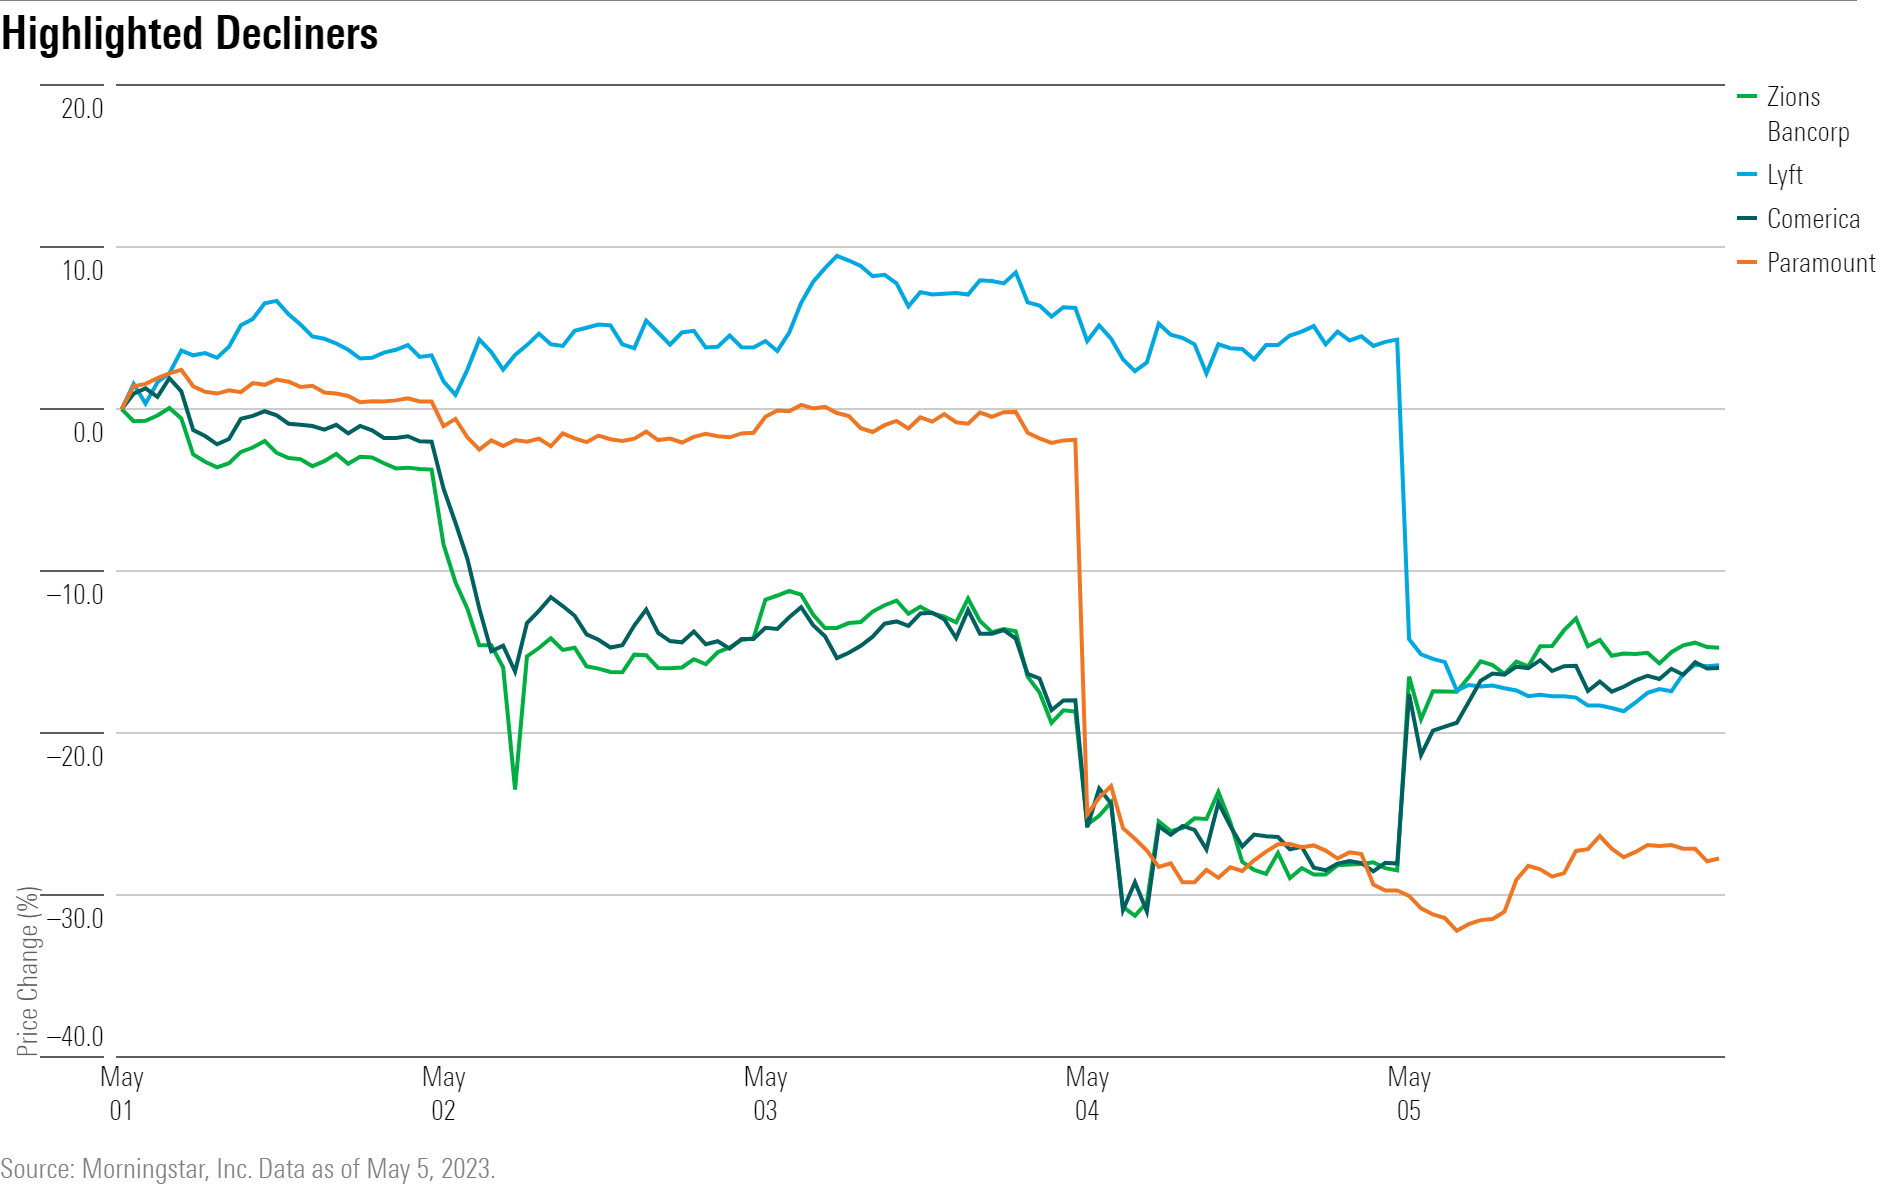 A line chart showing the performance of $ZION, $LYFT, $CMA, and $PARA stock.